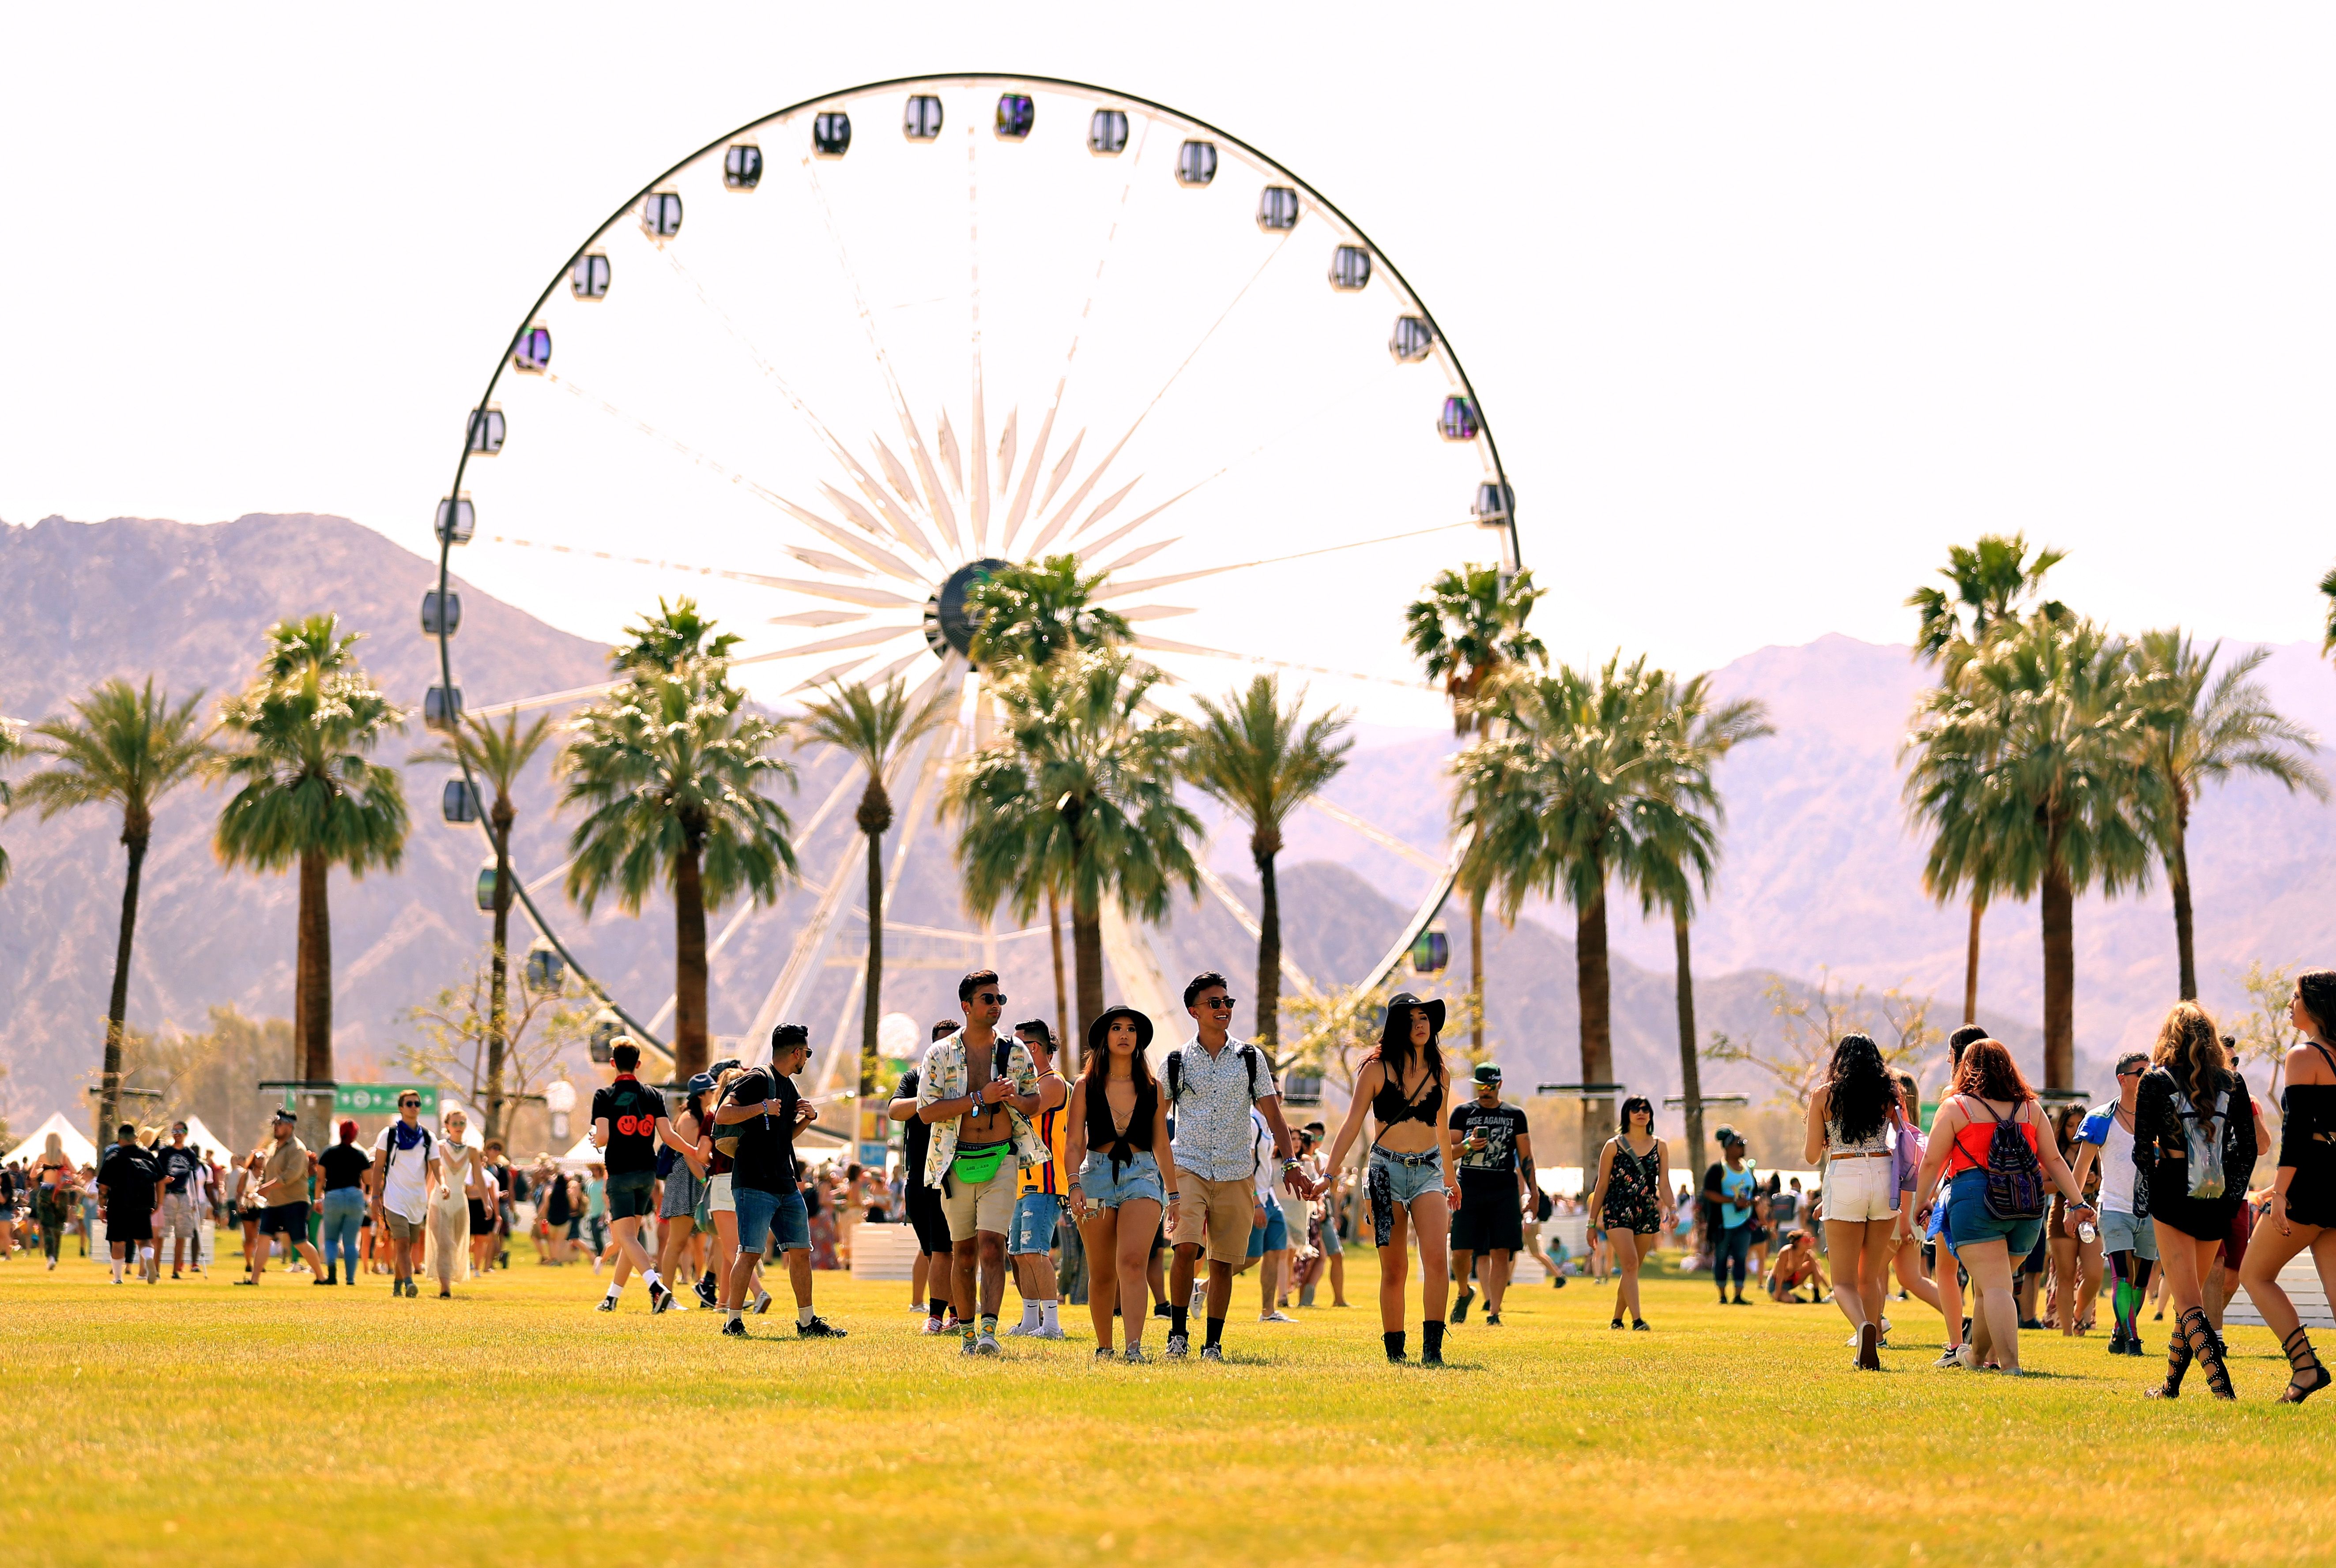 2018 Coachella Valley Music And Arts Festival Wallpapers Wallpaper Cave